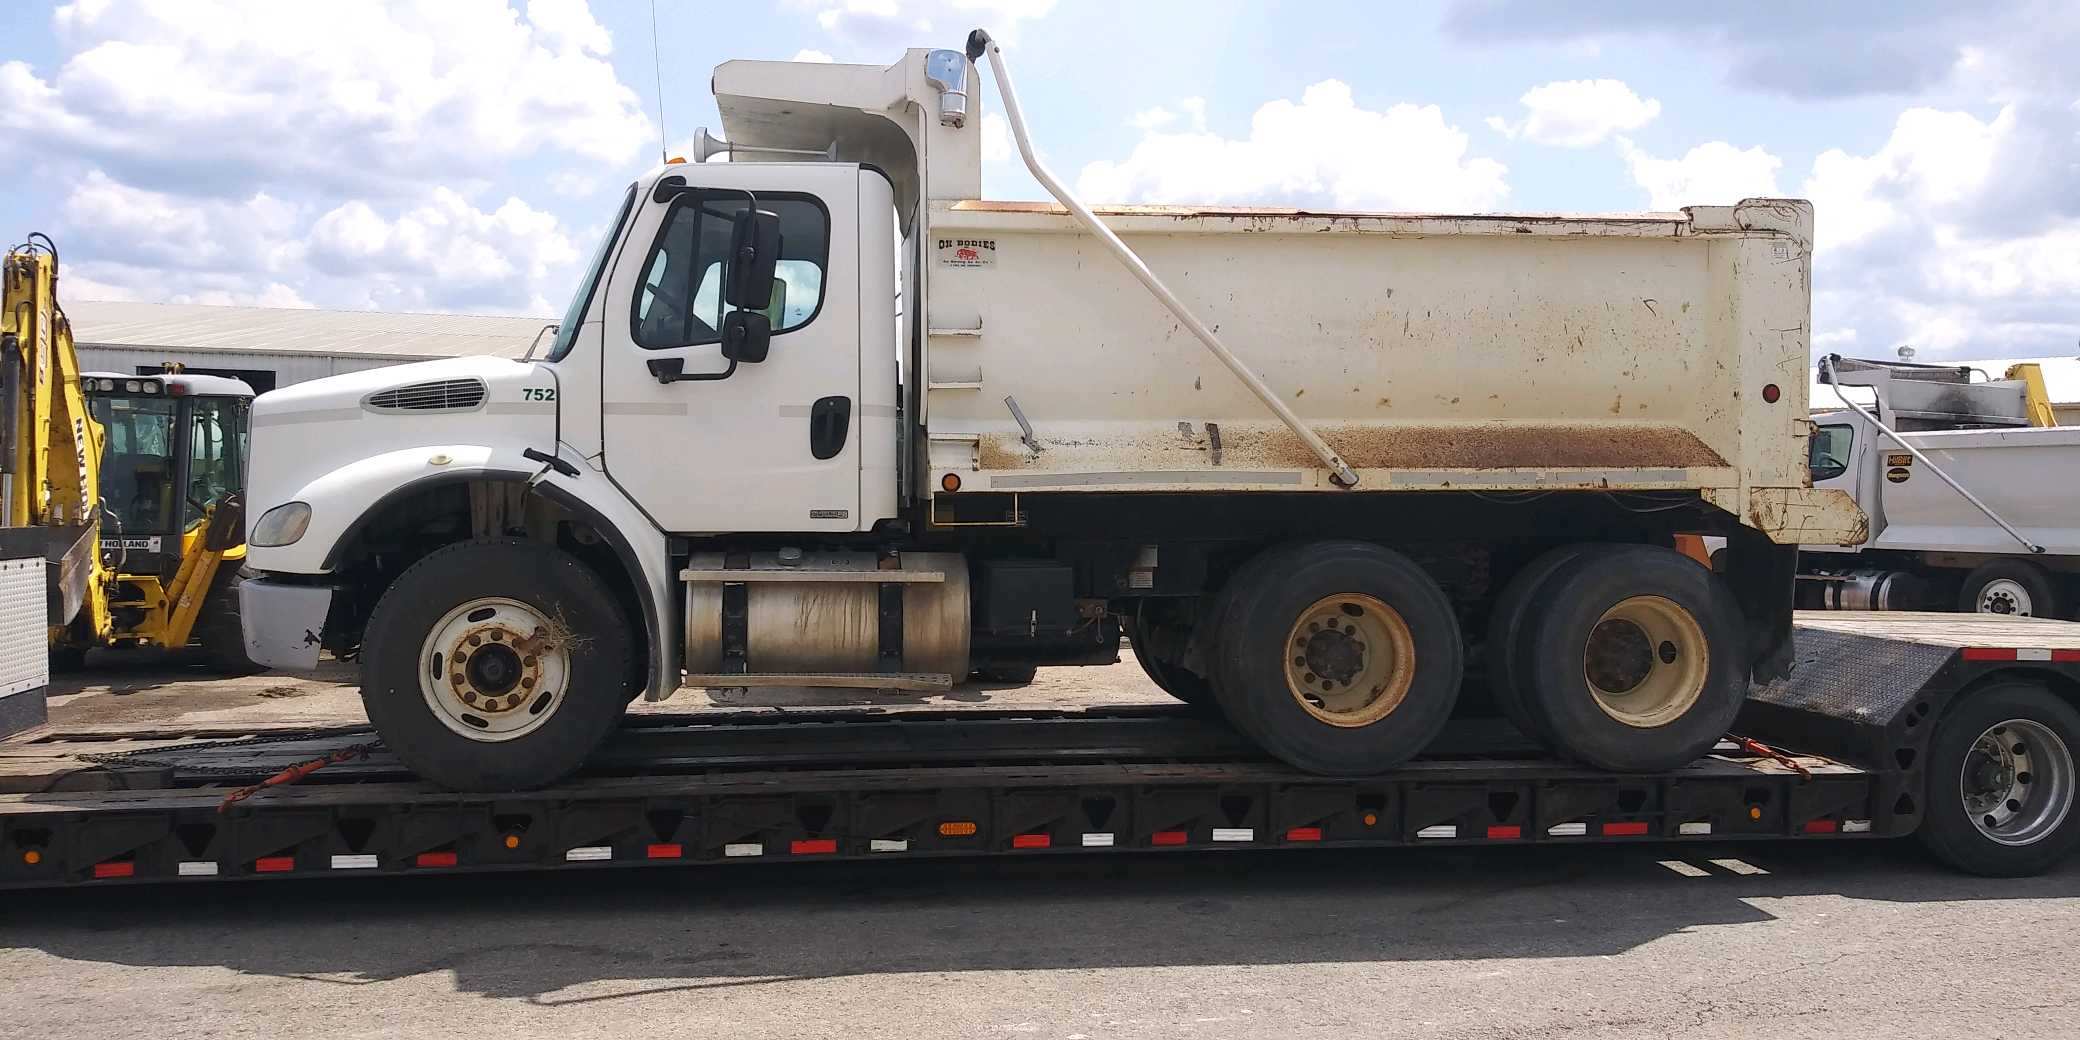 Shipping a Freightliner dump tractor to Jacksonville, FL.